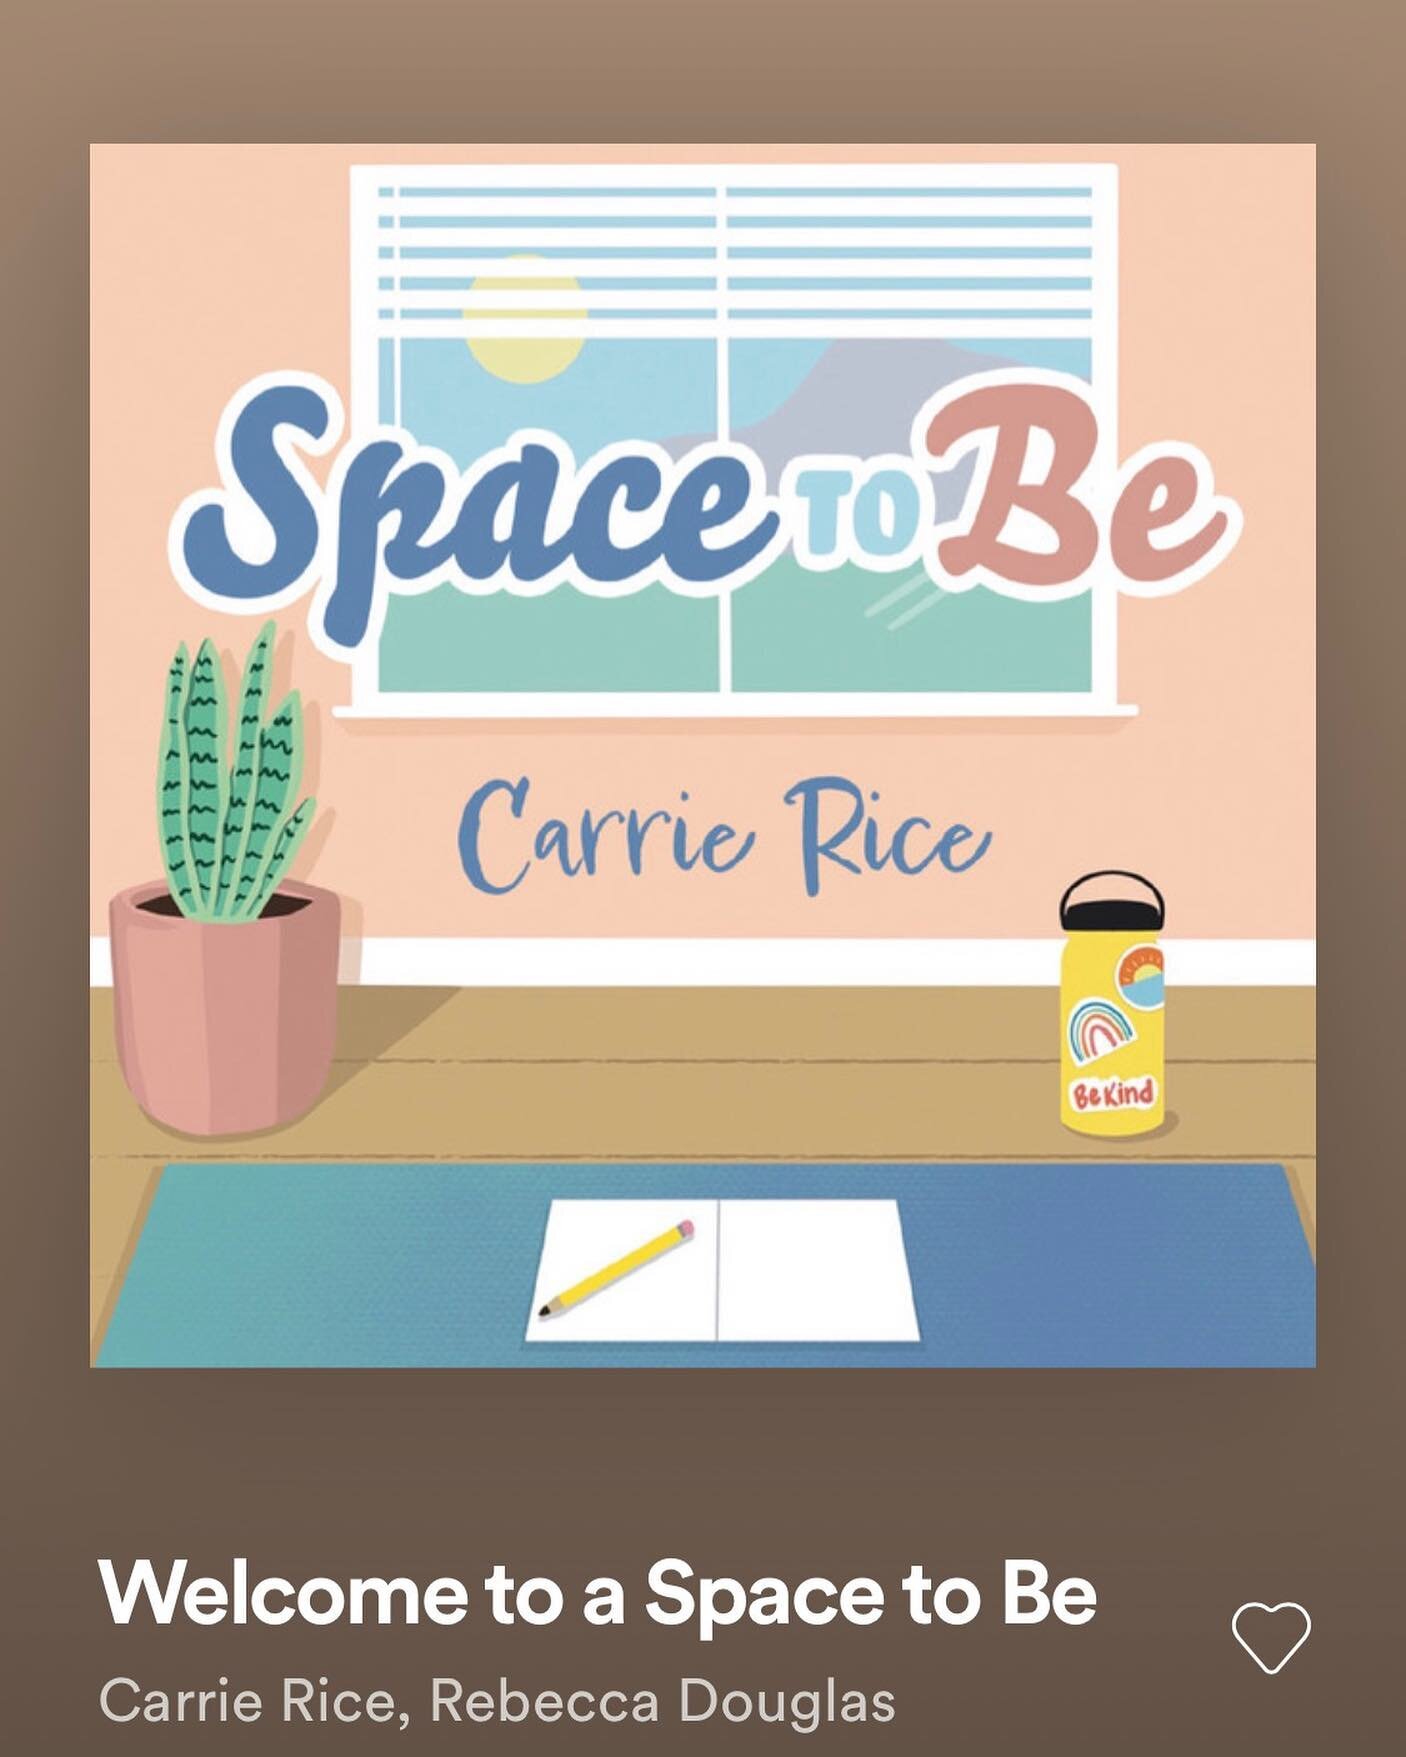 It&rsquo;s OFFICIALLY on Spotify! Many other streaming sites to come. But if you use Spotify feel free to check out the album today. Even &ldquo;follow&rdquo; to keep it handy! #myspacetobe #youthyoga #kidsyogamusic #kidsguidedmeditation #youthyogasc